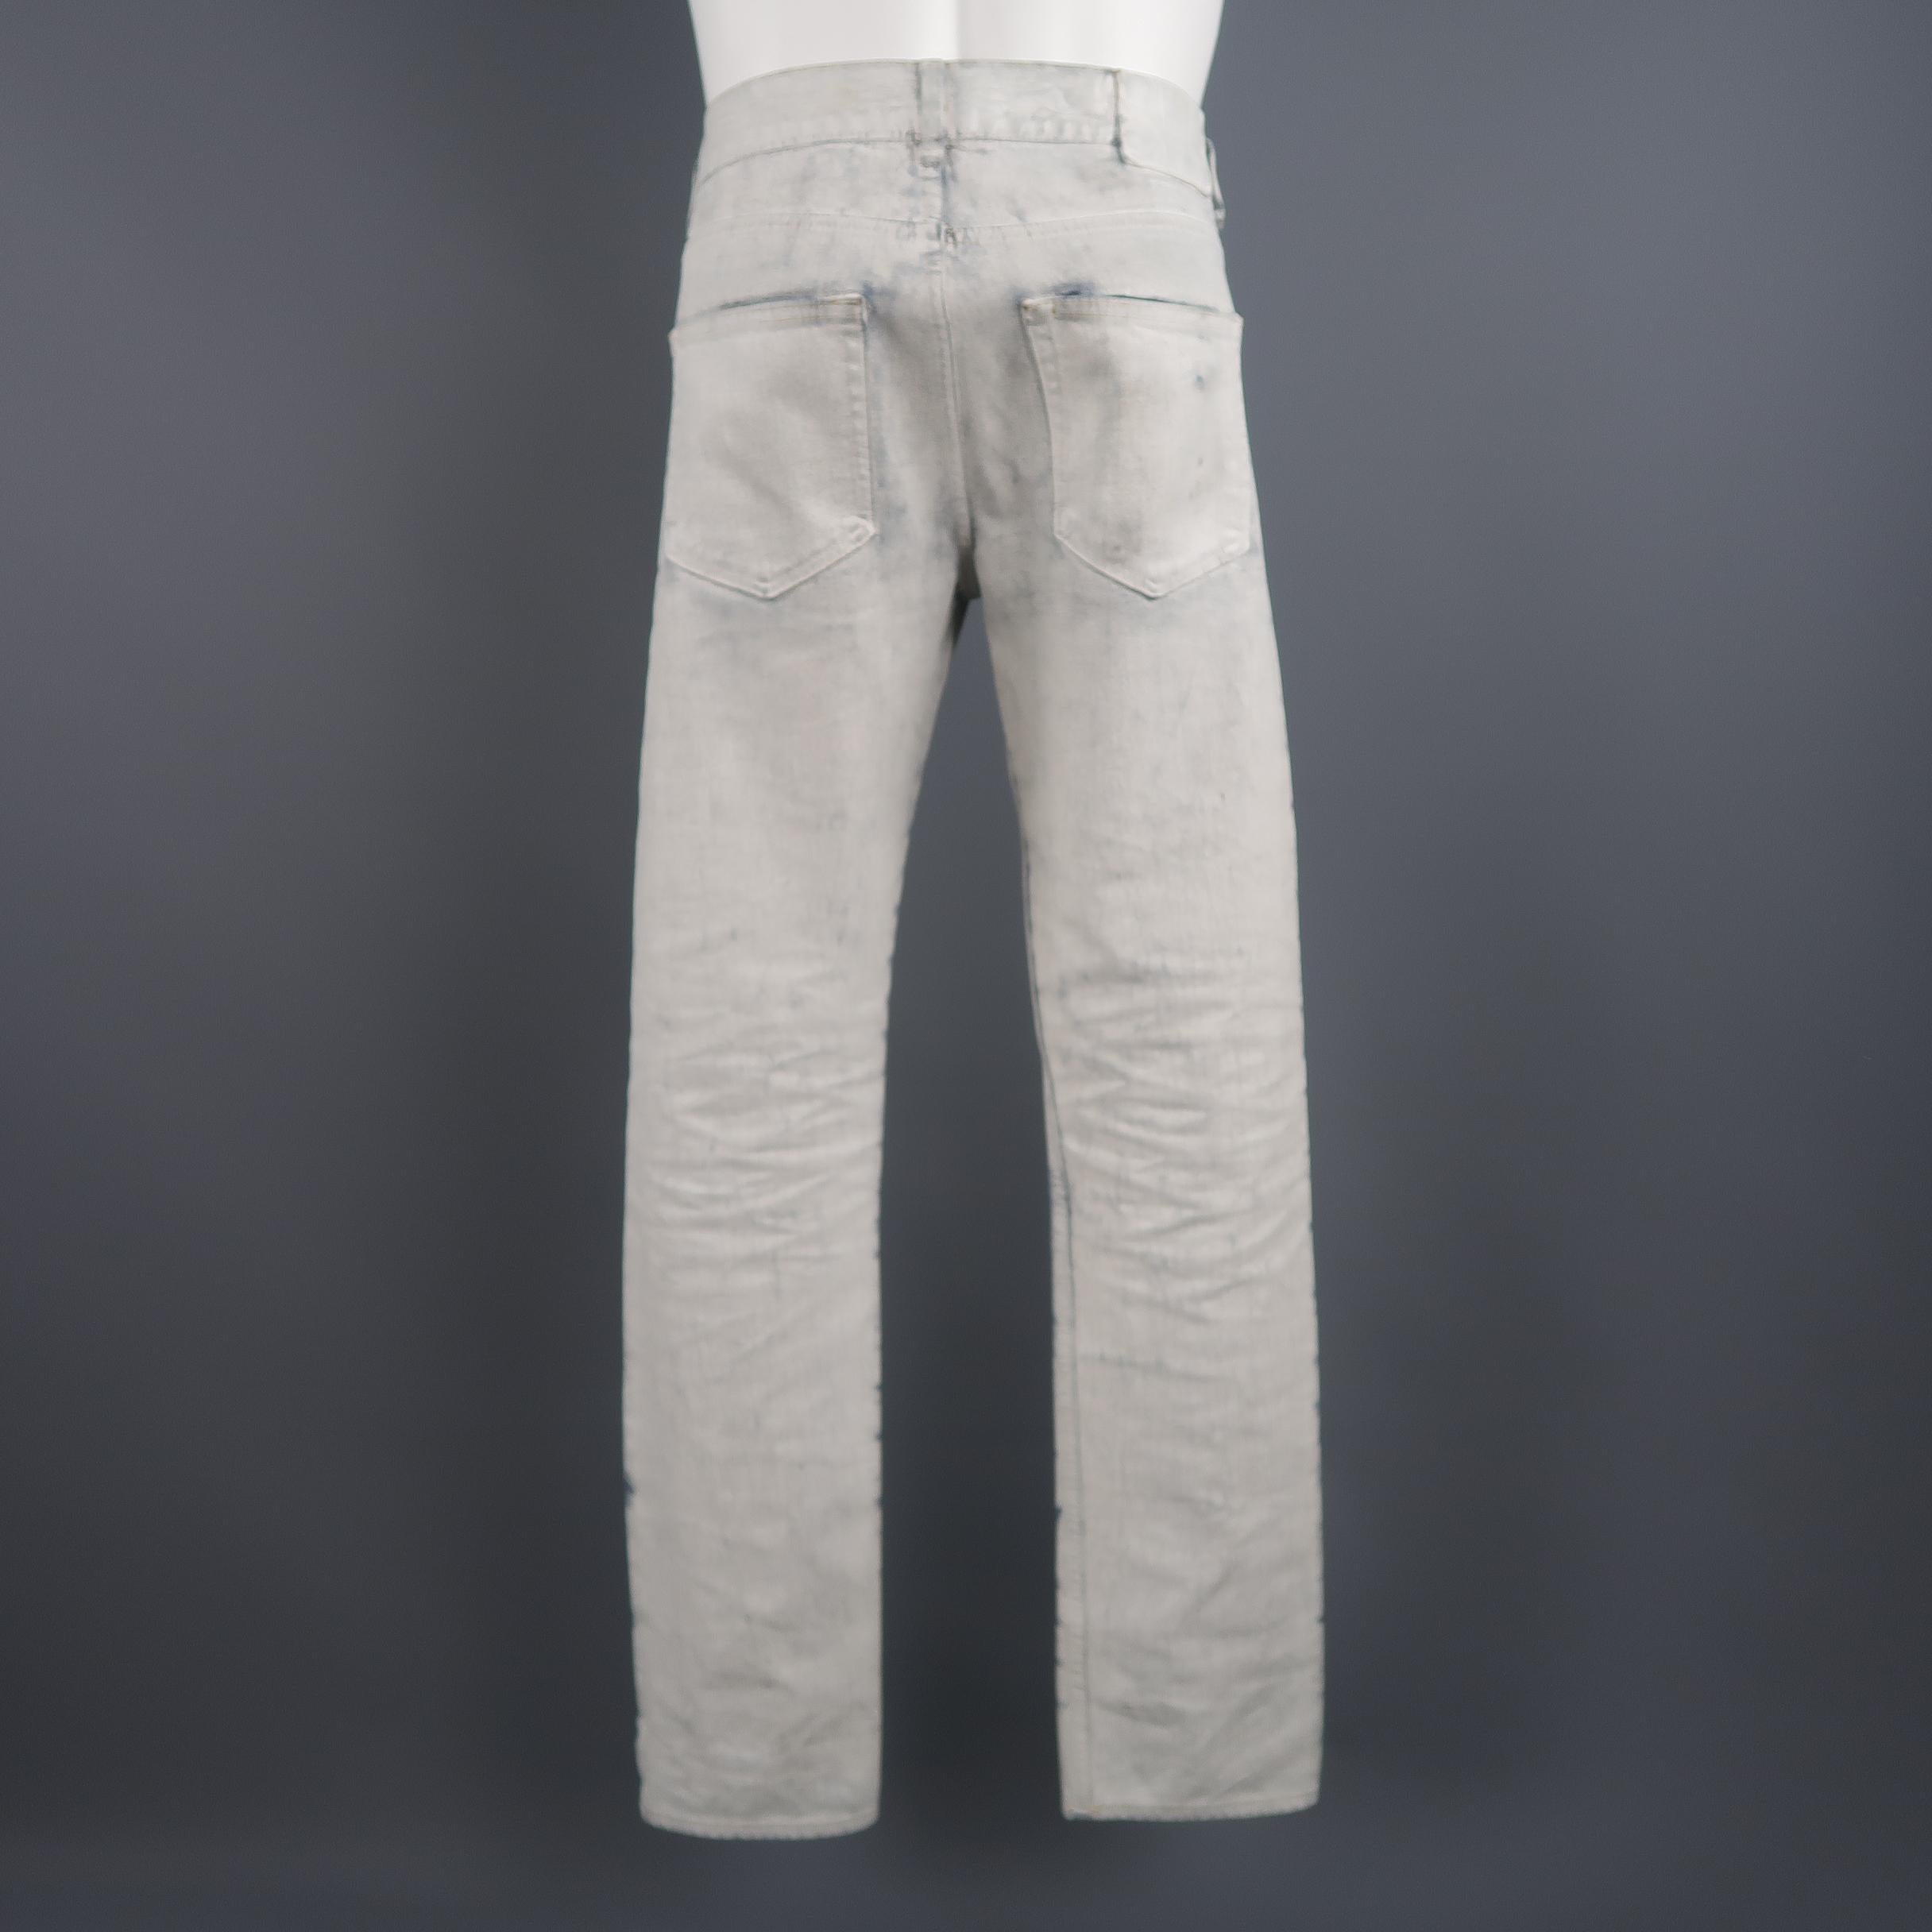 Maison Martin Margiela  X H&M Size 30 come in white painted distressed jeans  with fly button closure.
 
Good Pre-Owned Condition.
Marked: US 30
 
Measurements:
 
Waist: 34 in.
Rise: 10 in.
Inseam: 32 in.